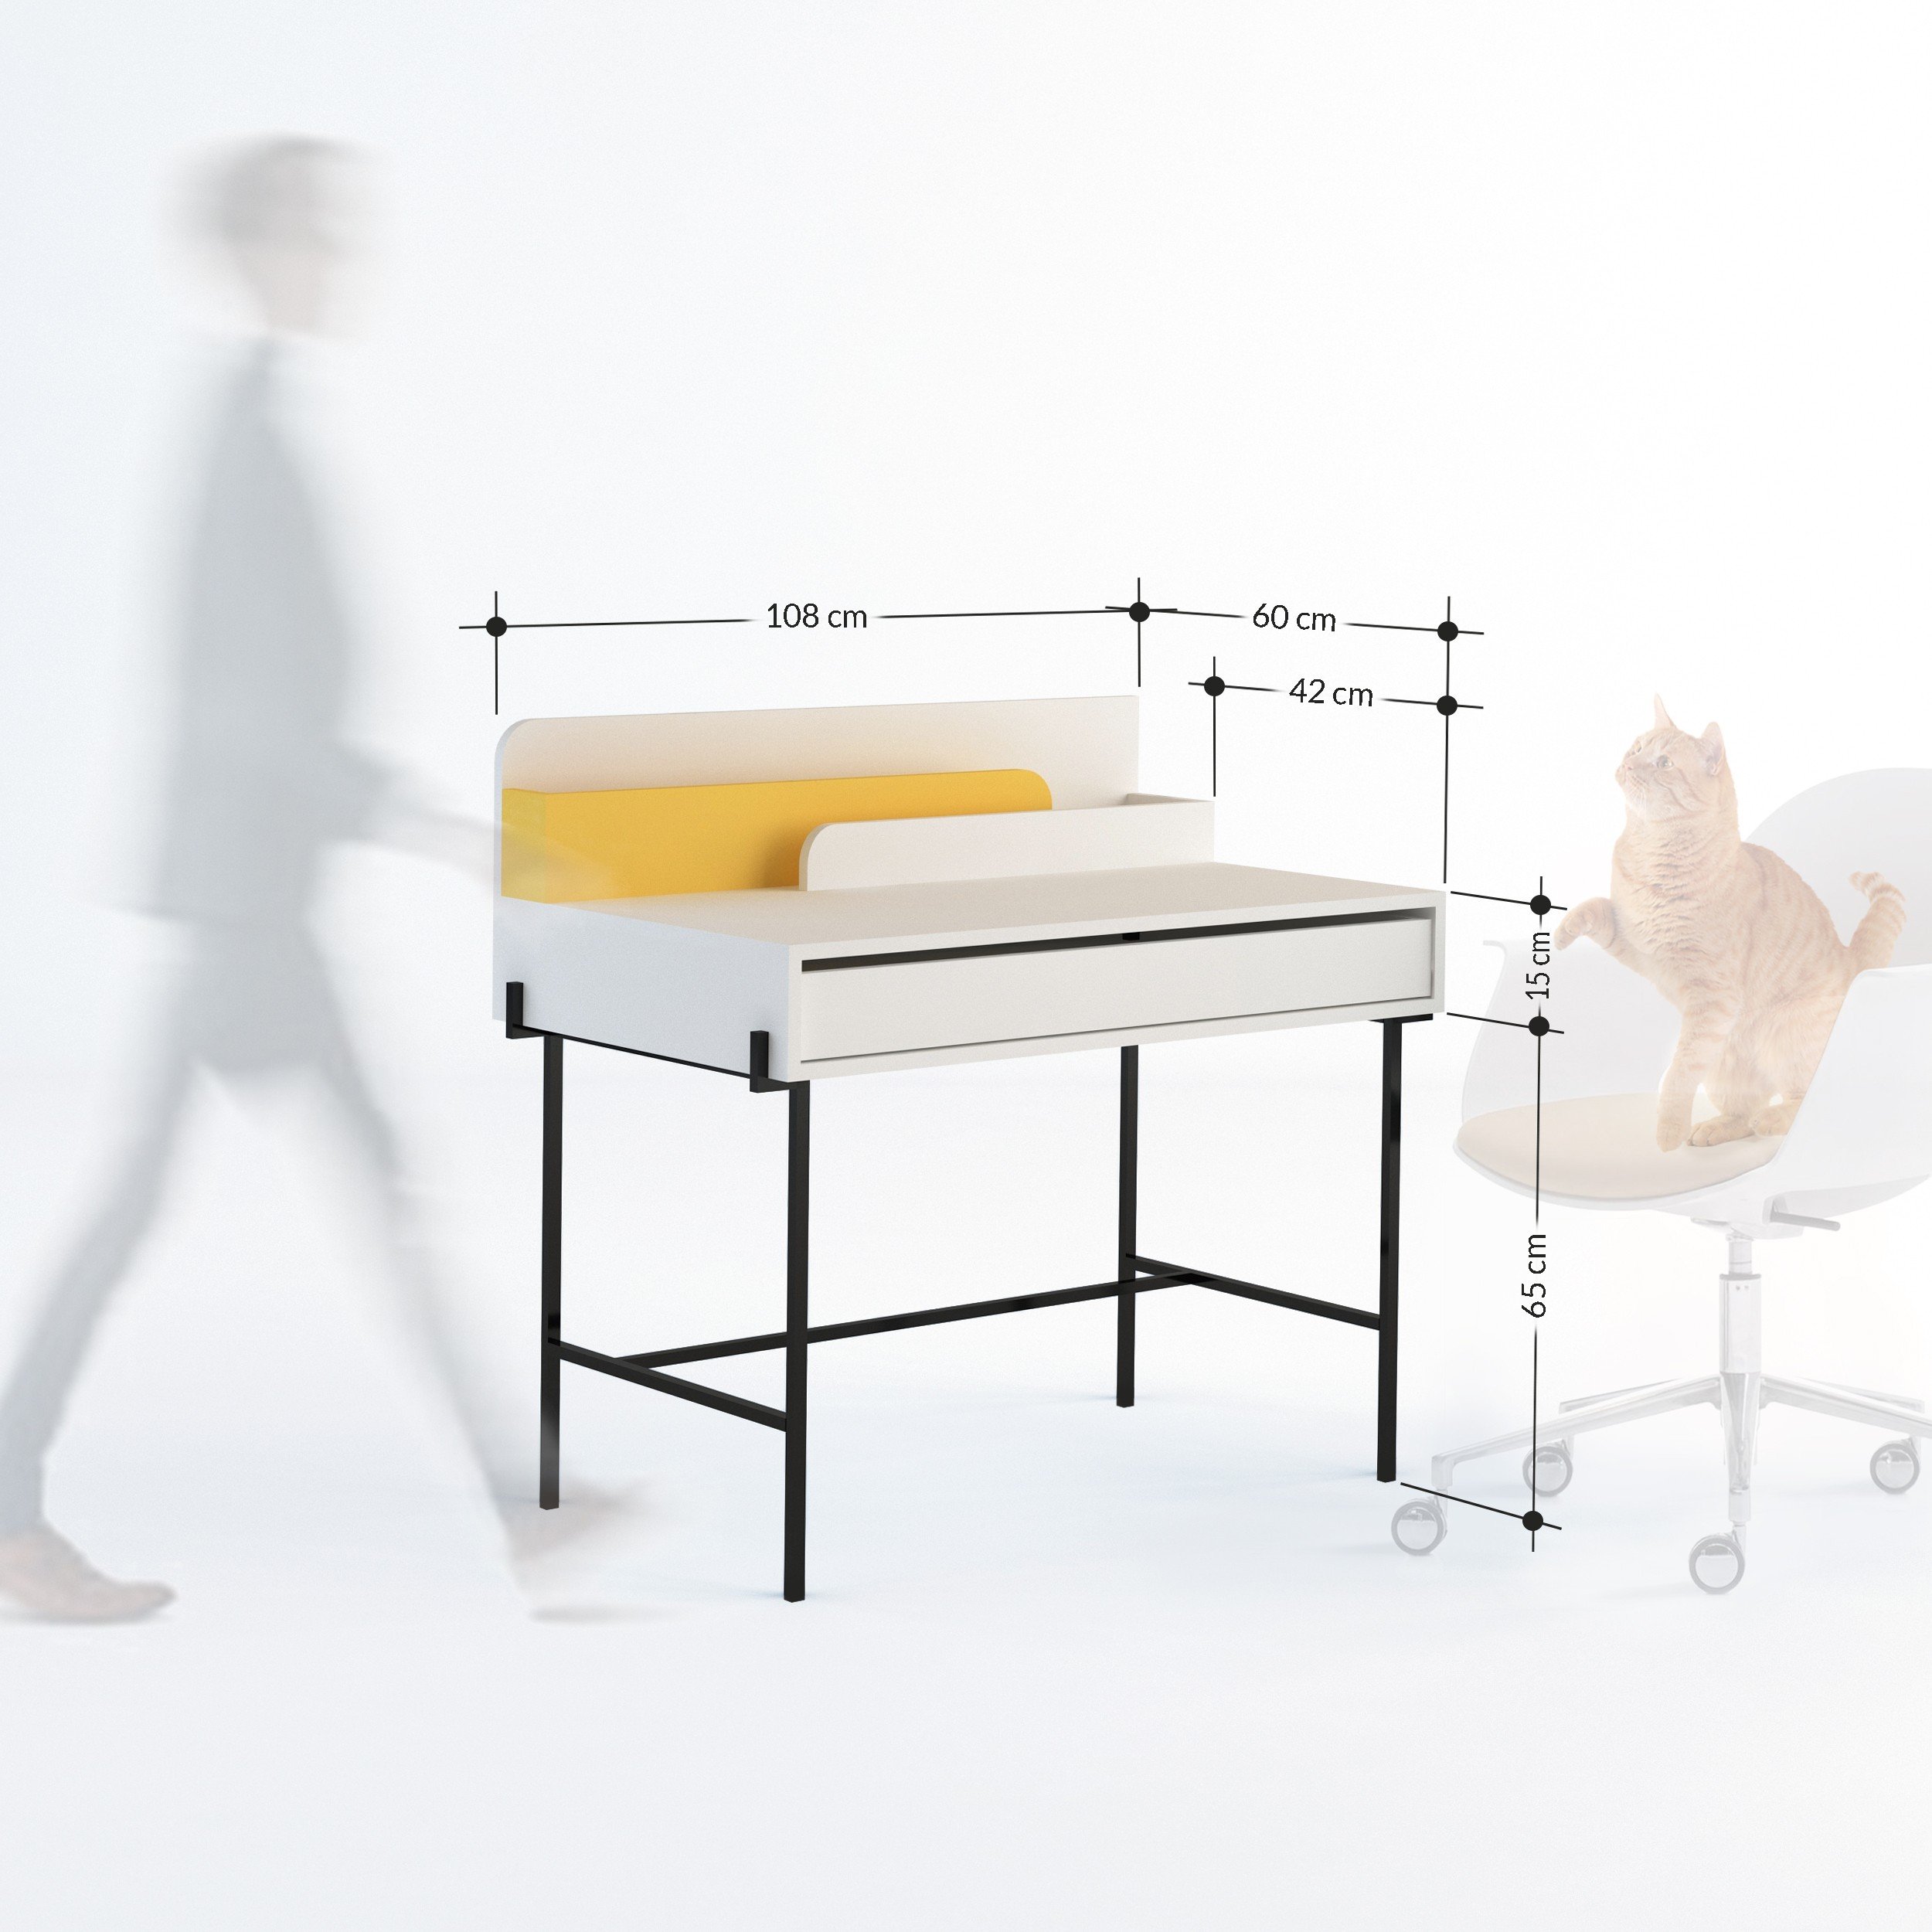 LEILA WORKING TABLE - WHITE - ANTHRACITE M.MS.23313.4